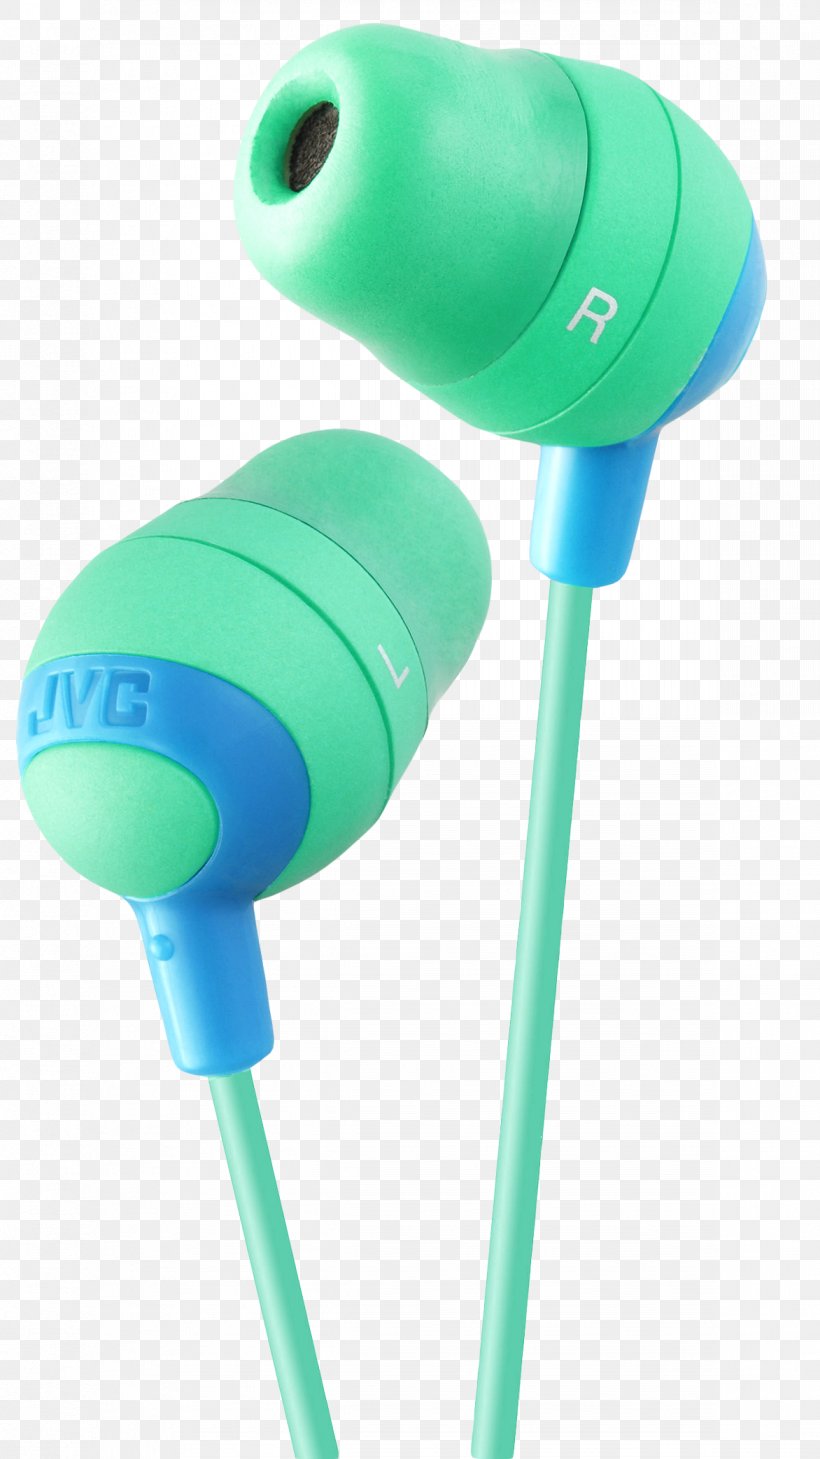 Headphones Microphone Stereophonic Sound Apple Earbuds, PNG, 1172x2086px, Headphones, Apple Earbuds, Audio, Audio Equipment, Electronic Device Download Free